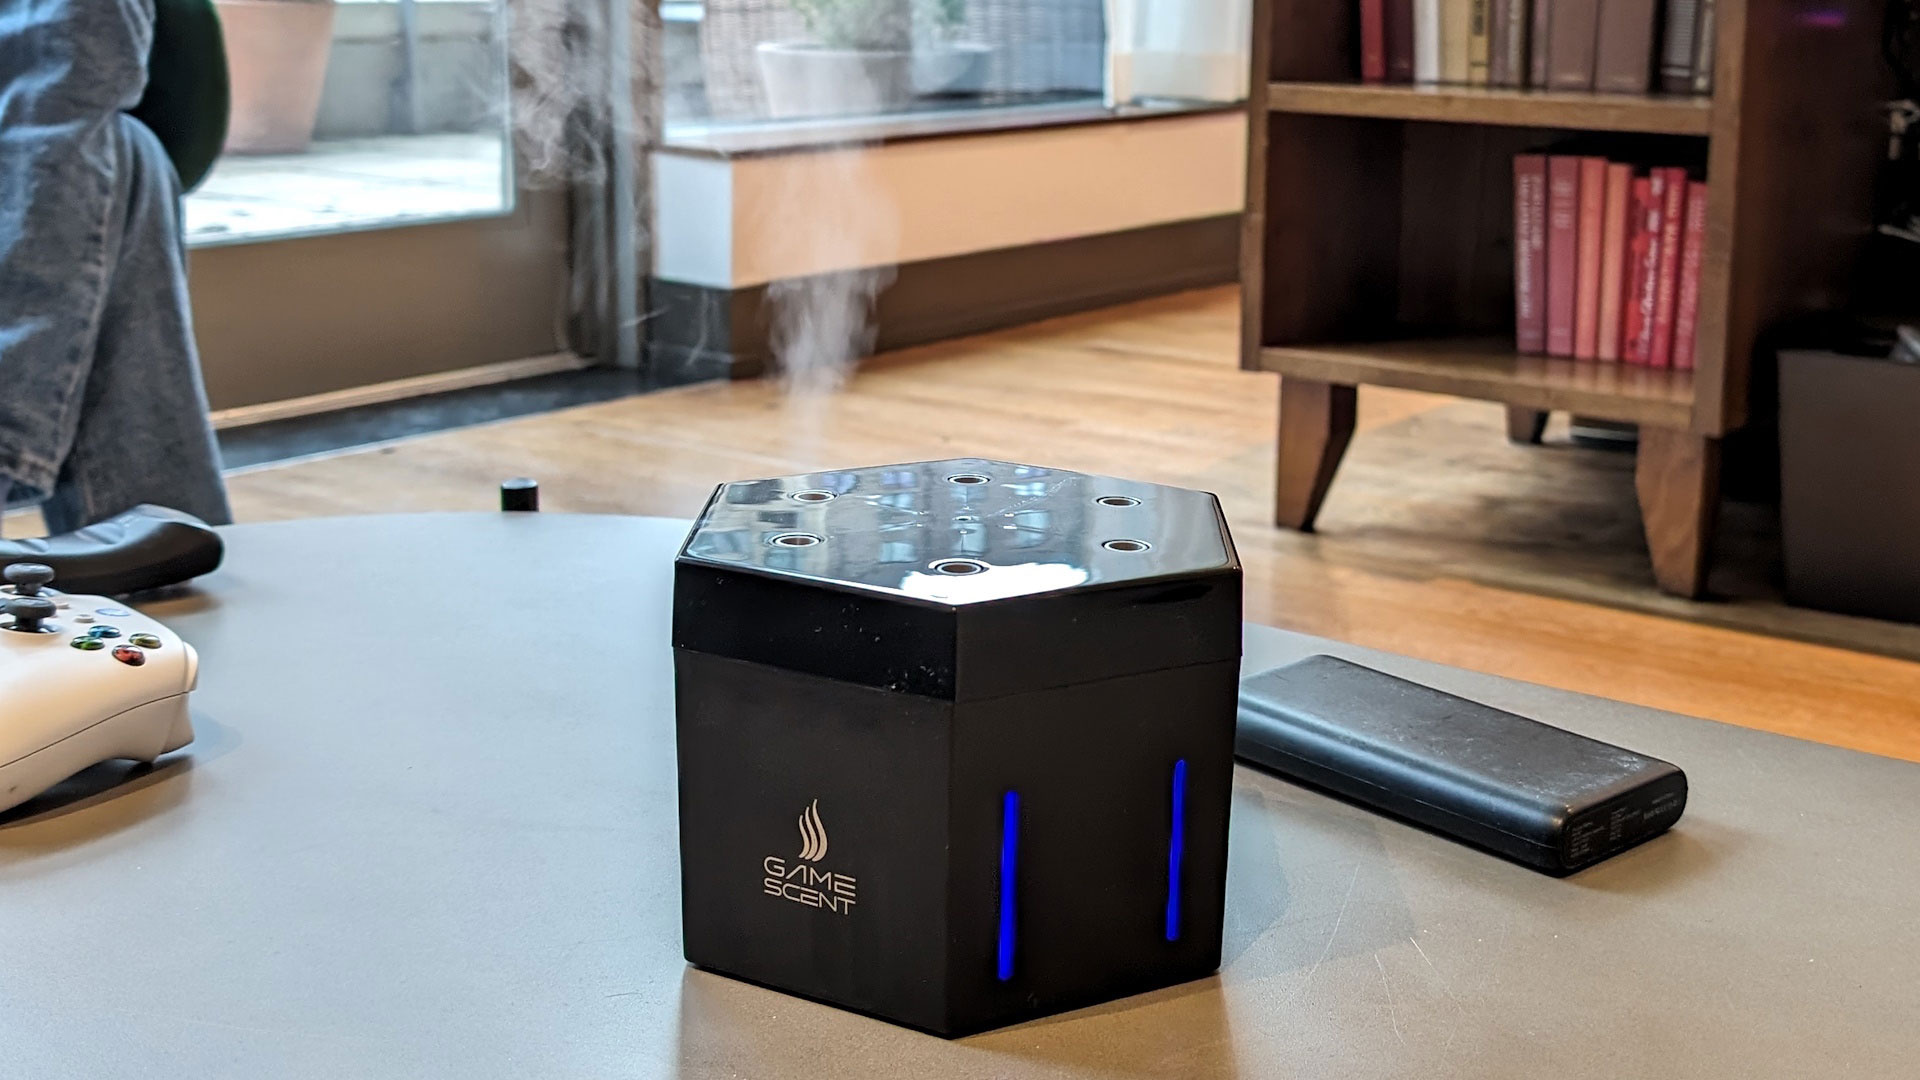 #TechTuesday: This Video Gaming Device Releases Scents While You Play